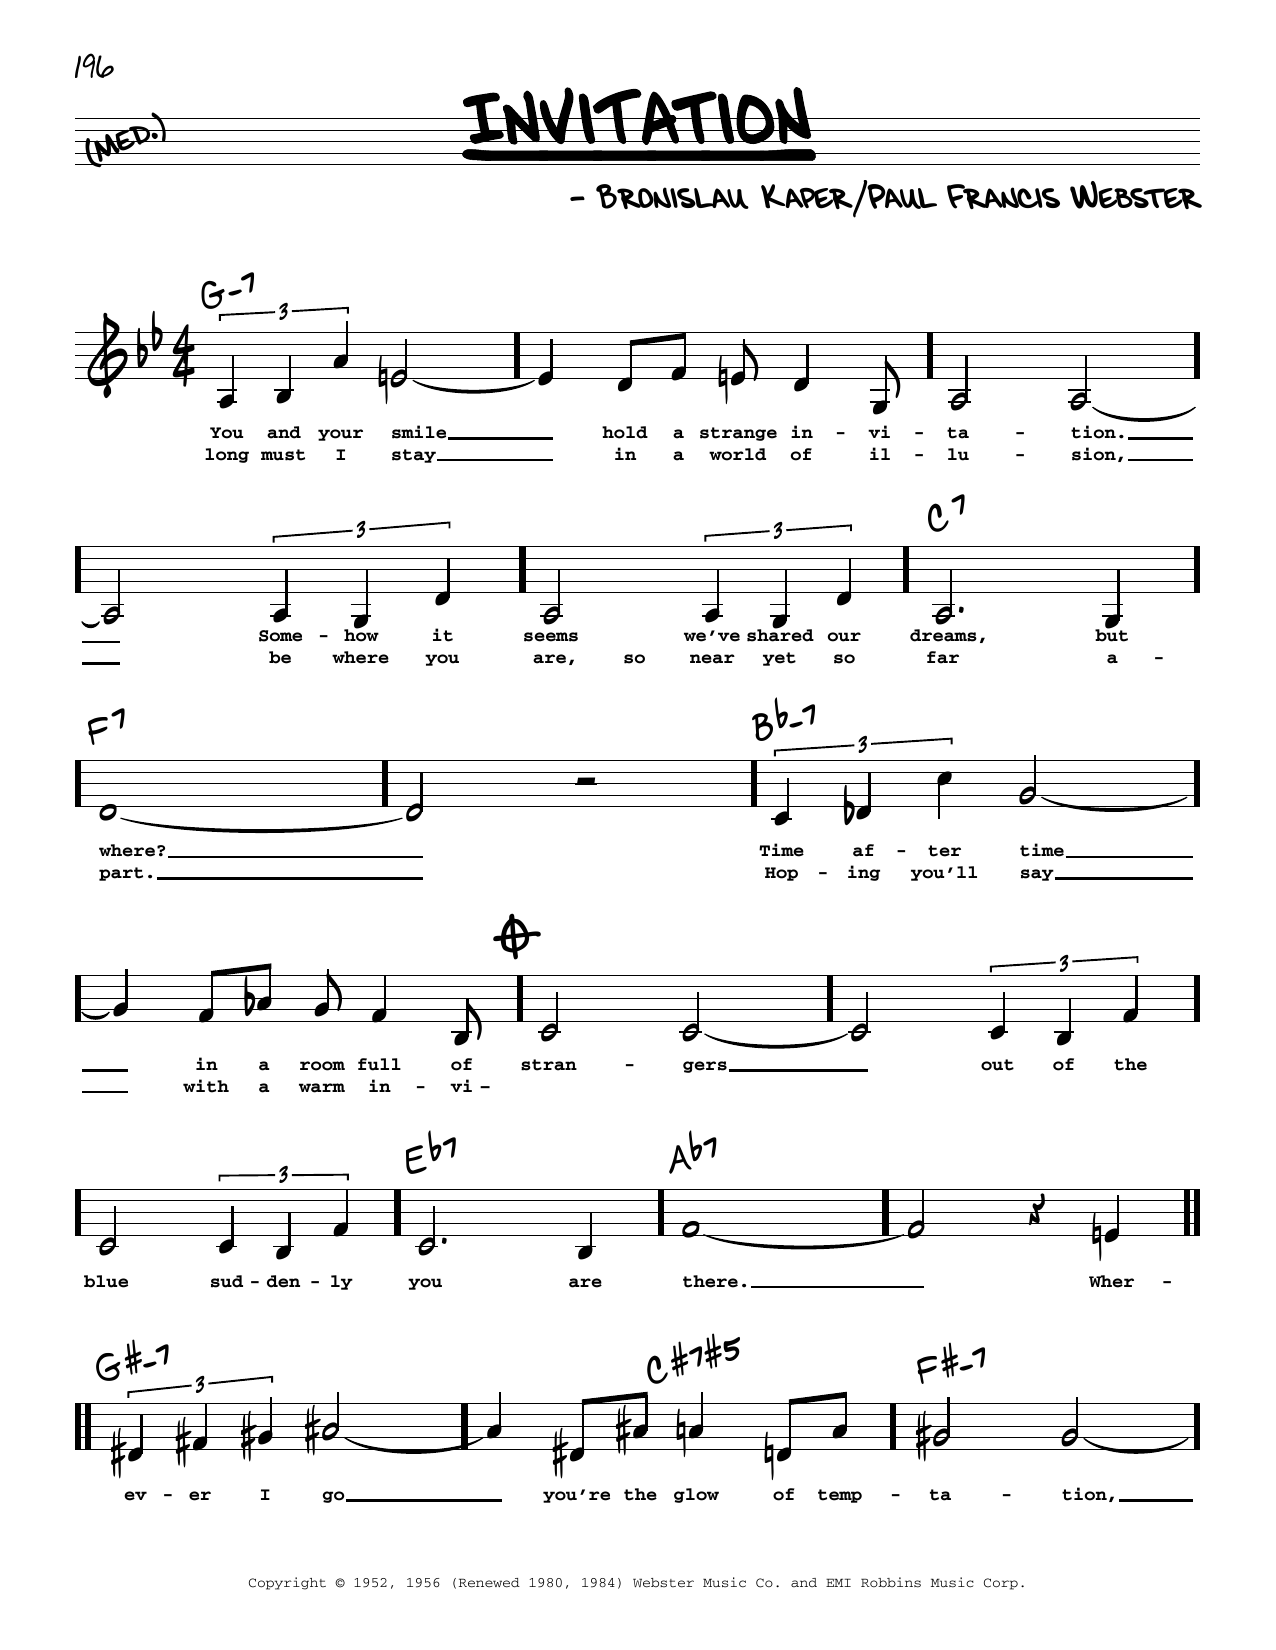 Paul Francis Webster Invitation (Low Voice) sheet music notes printable PDF score